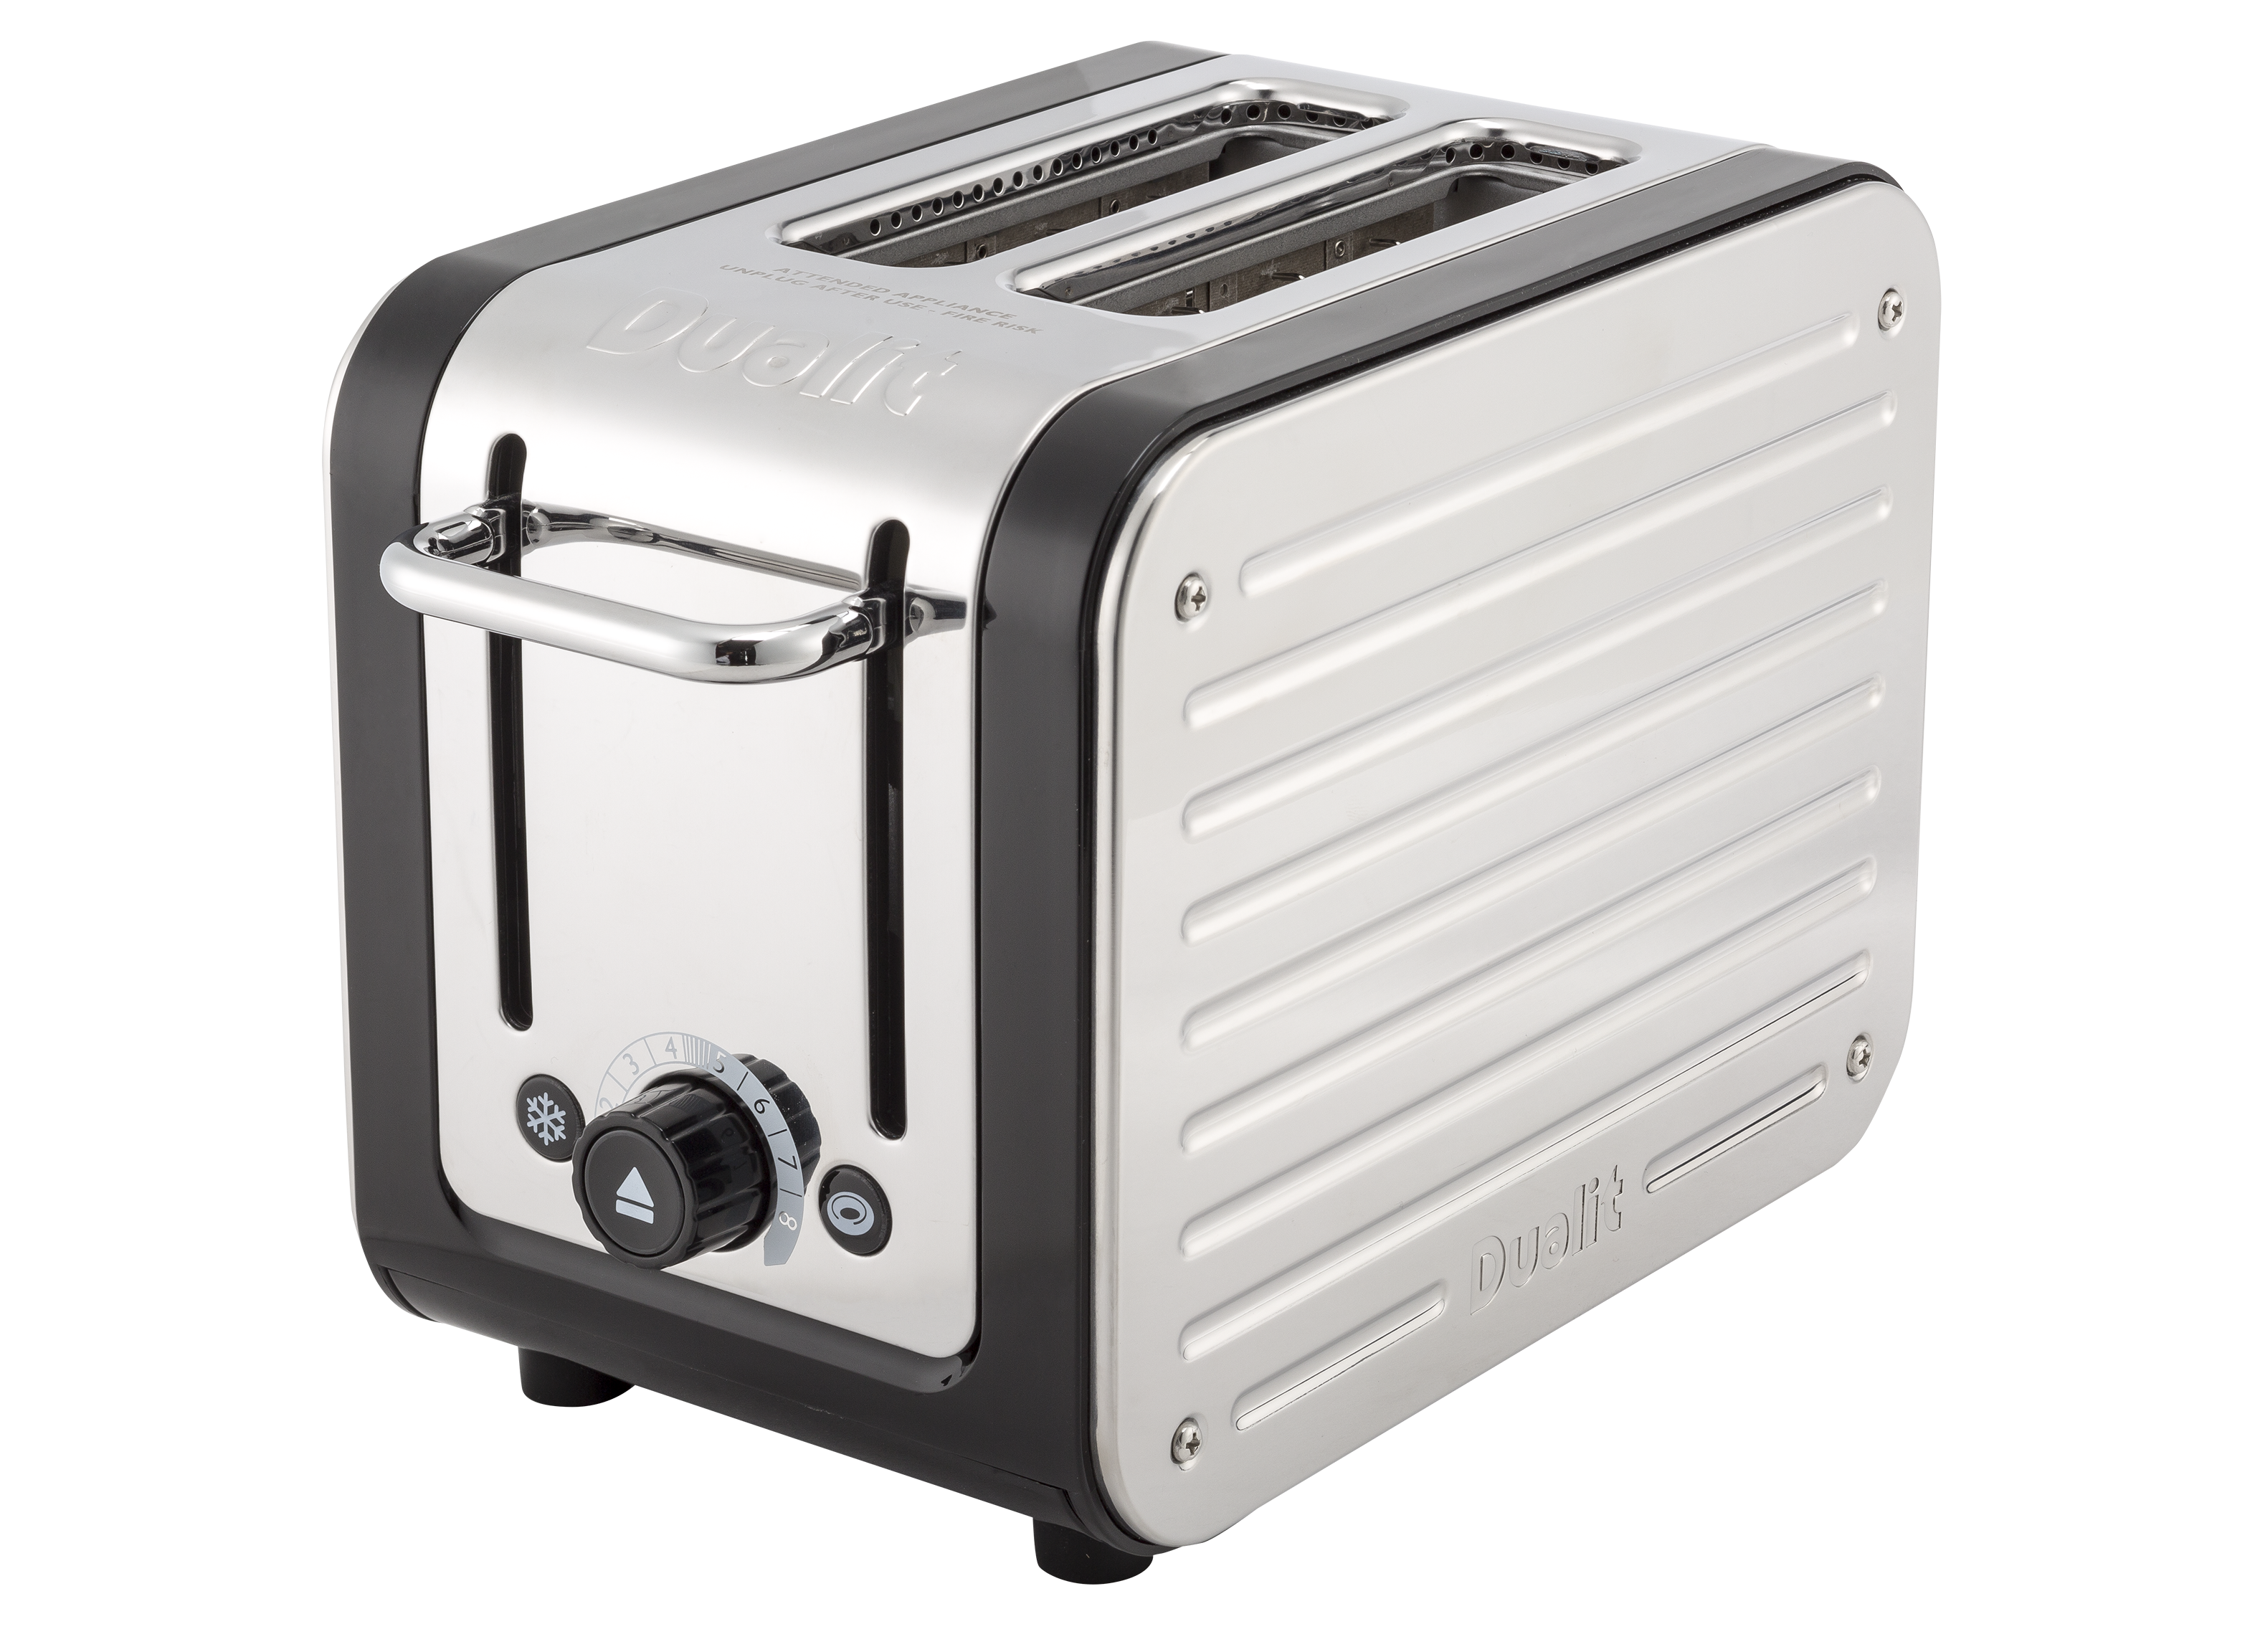 https://crdms.images.consumerreports.org/prod/products/cr/models/387668-toasters-dualit-designseries265552slice.png